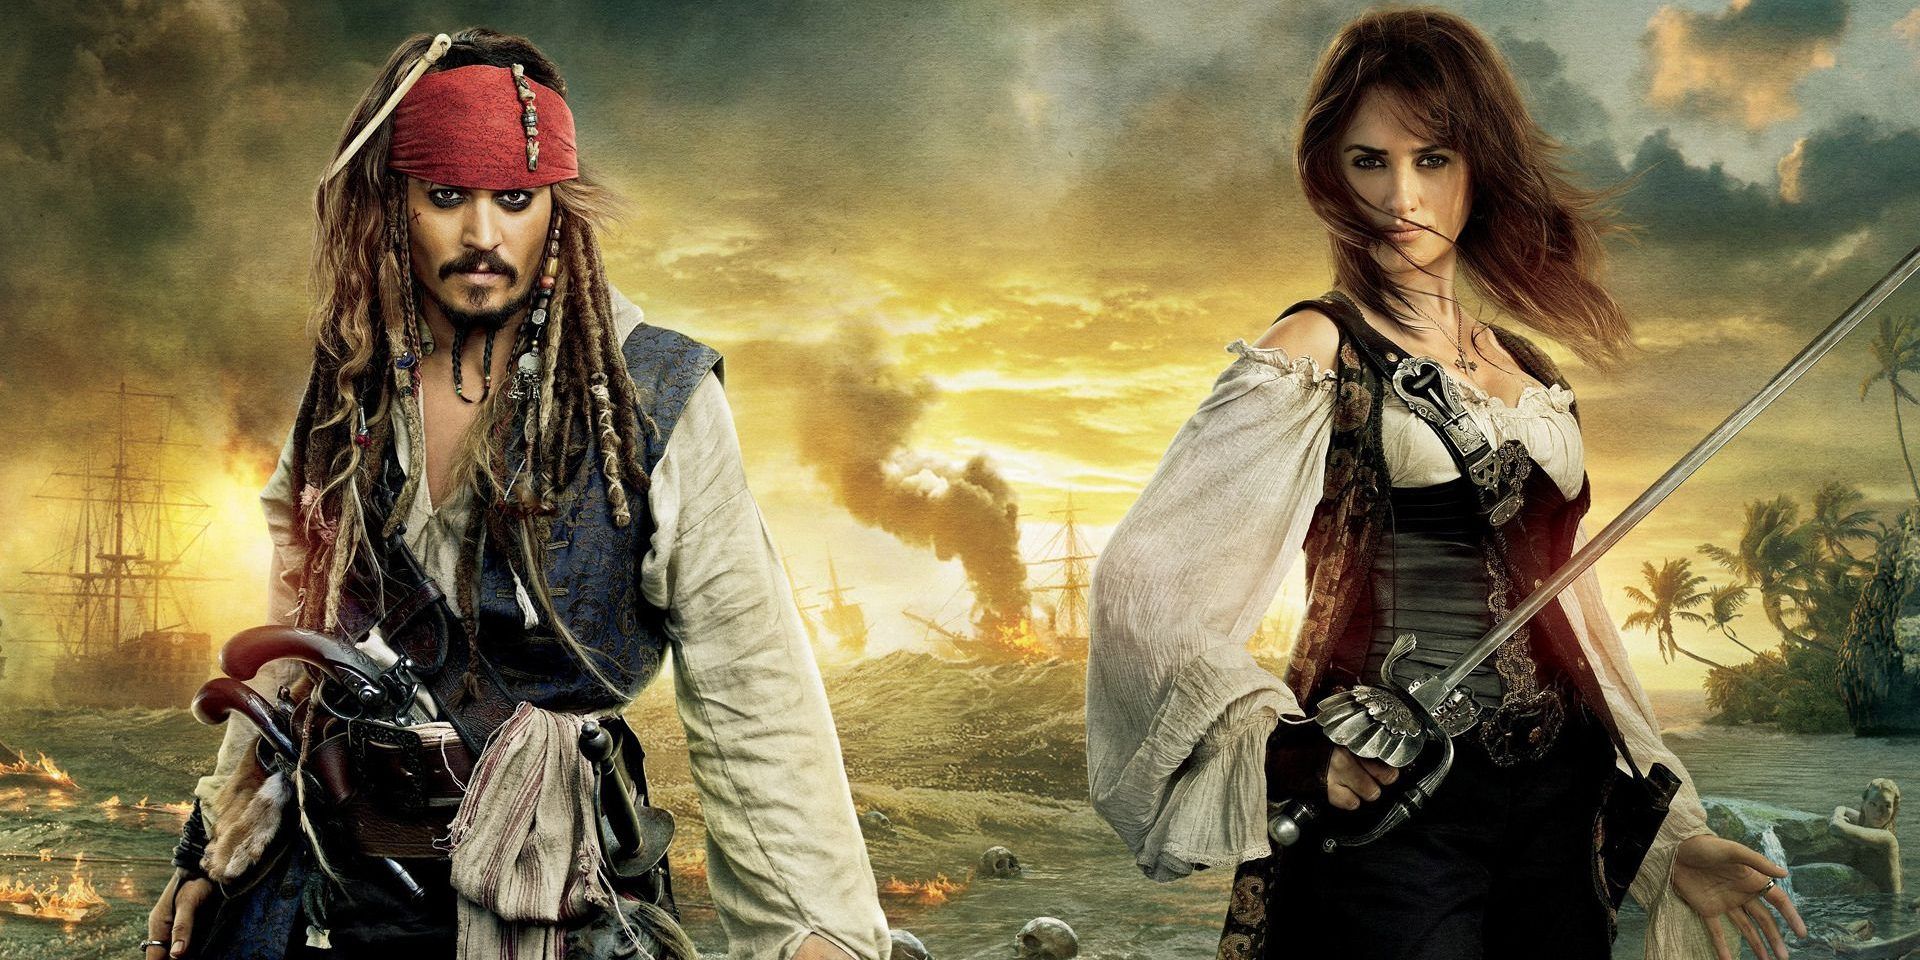 Pirates Of The Caribbean 4 Is Still The Most Expensive Movie Ever